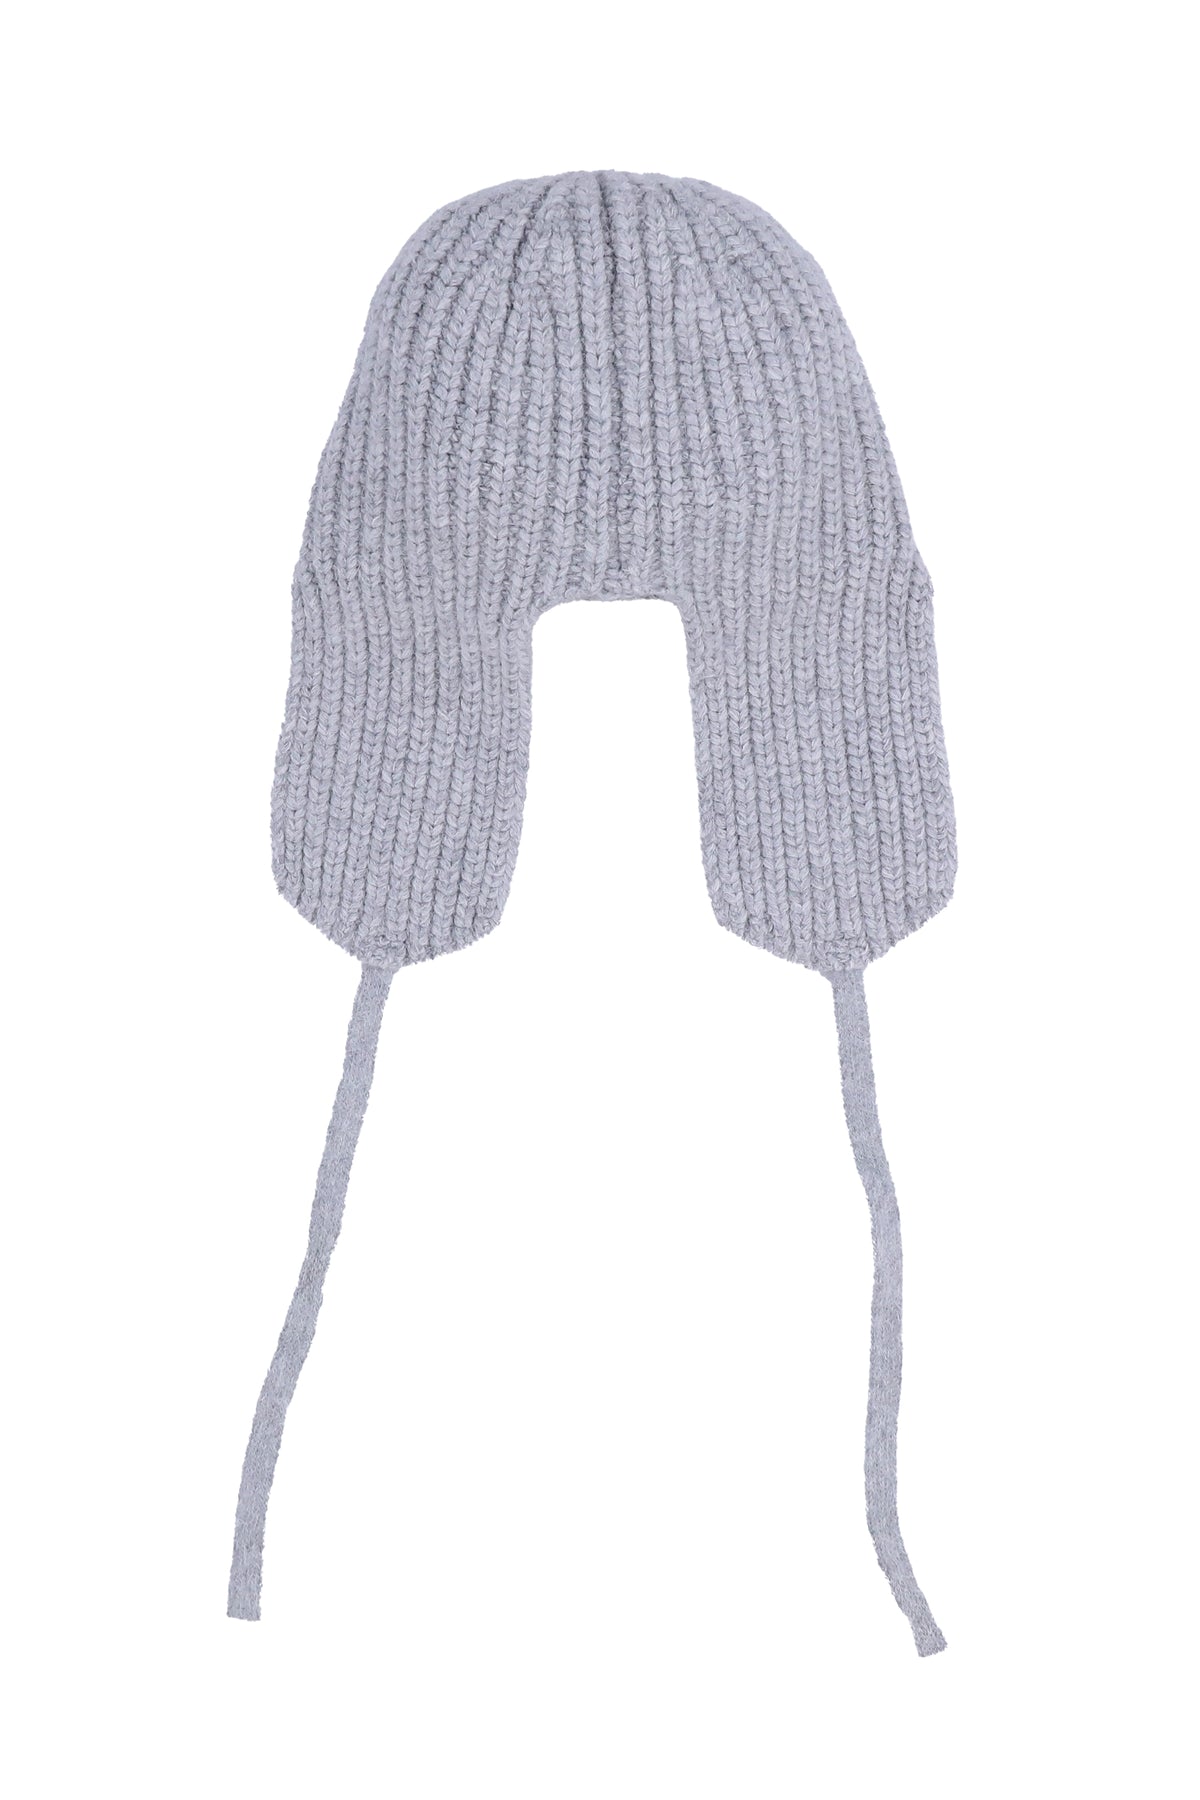 MOHAIR KNIT CAP / GRY